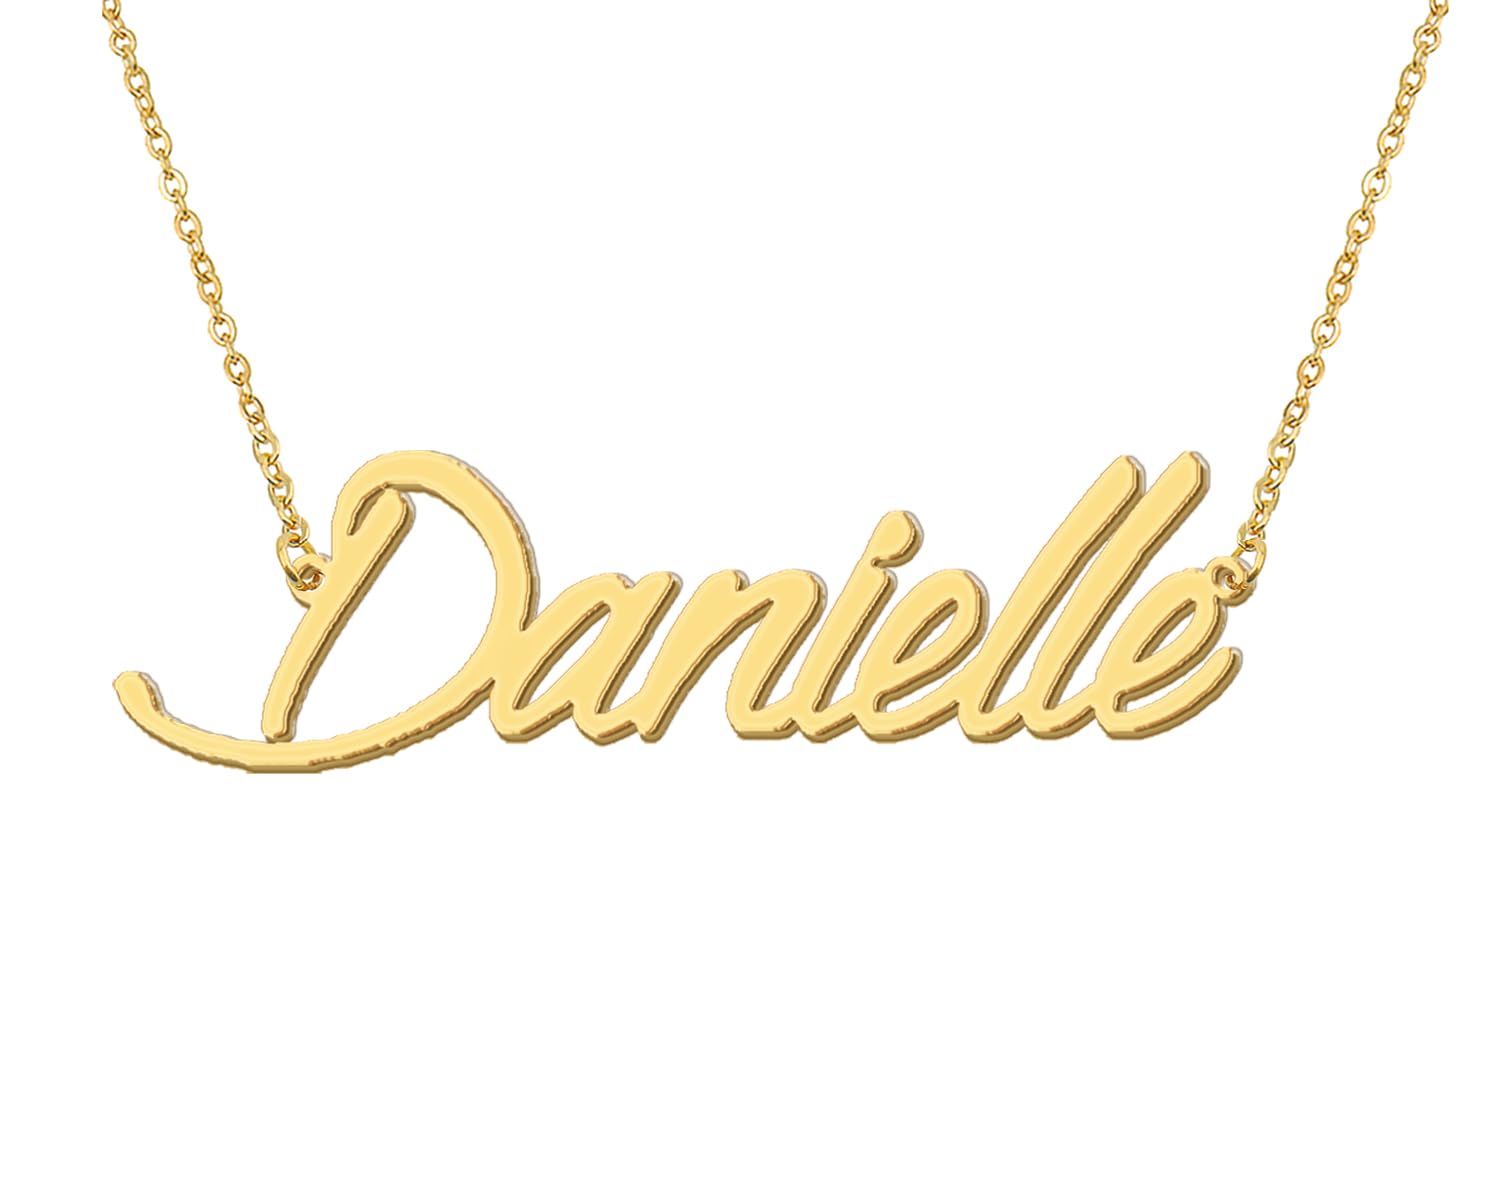 Aoloshow Danielle Name Pendant Necklace 18k Gold Plated Layer Choker Name Necklace Stainless Steel Jewelry for Familys